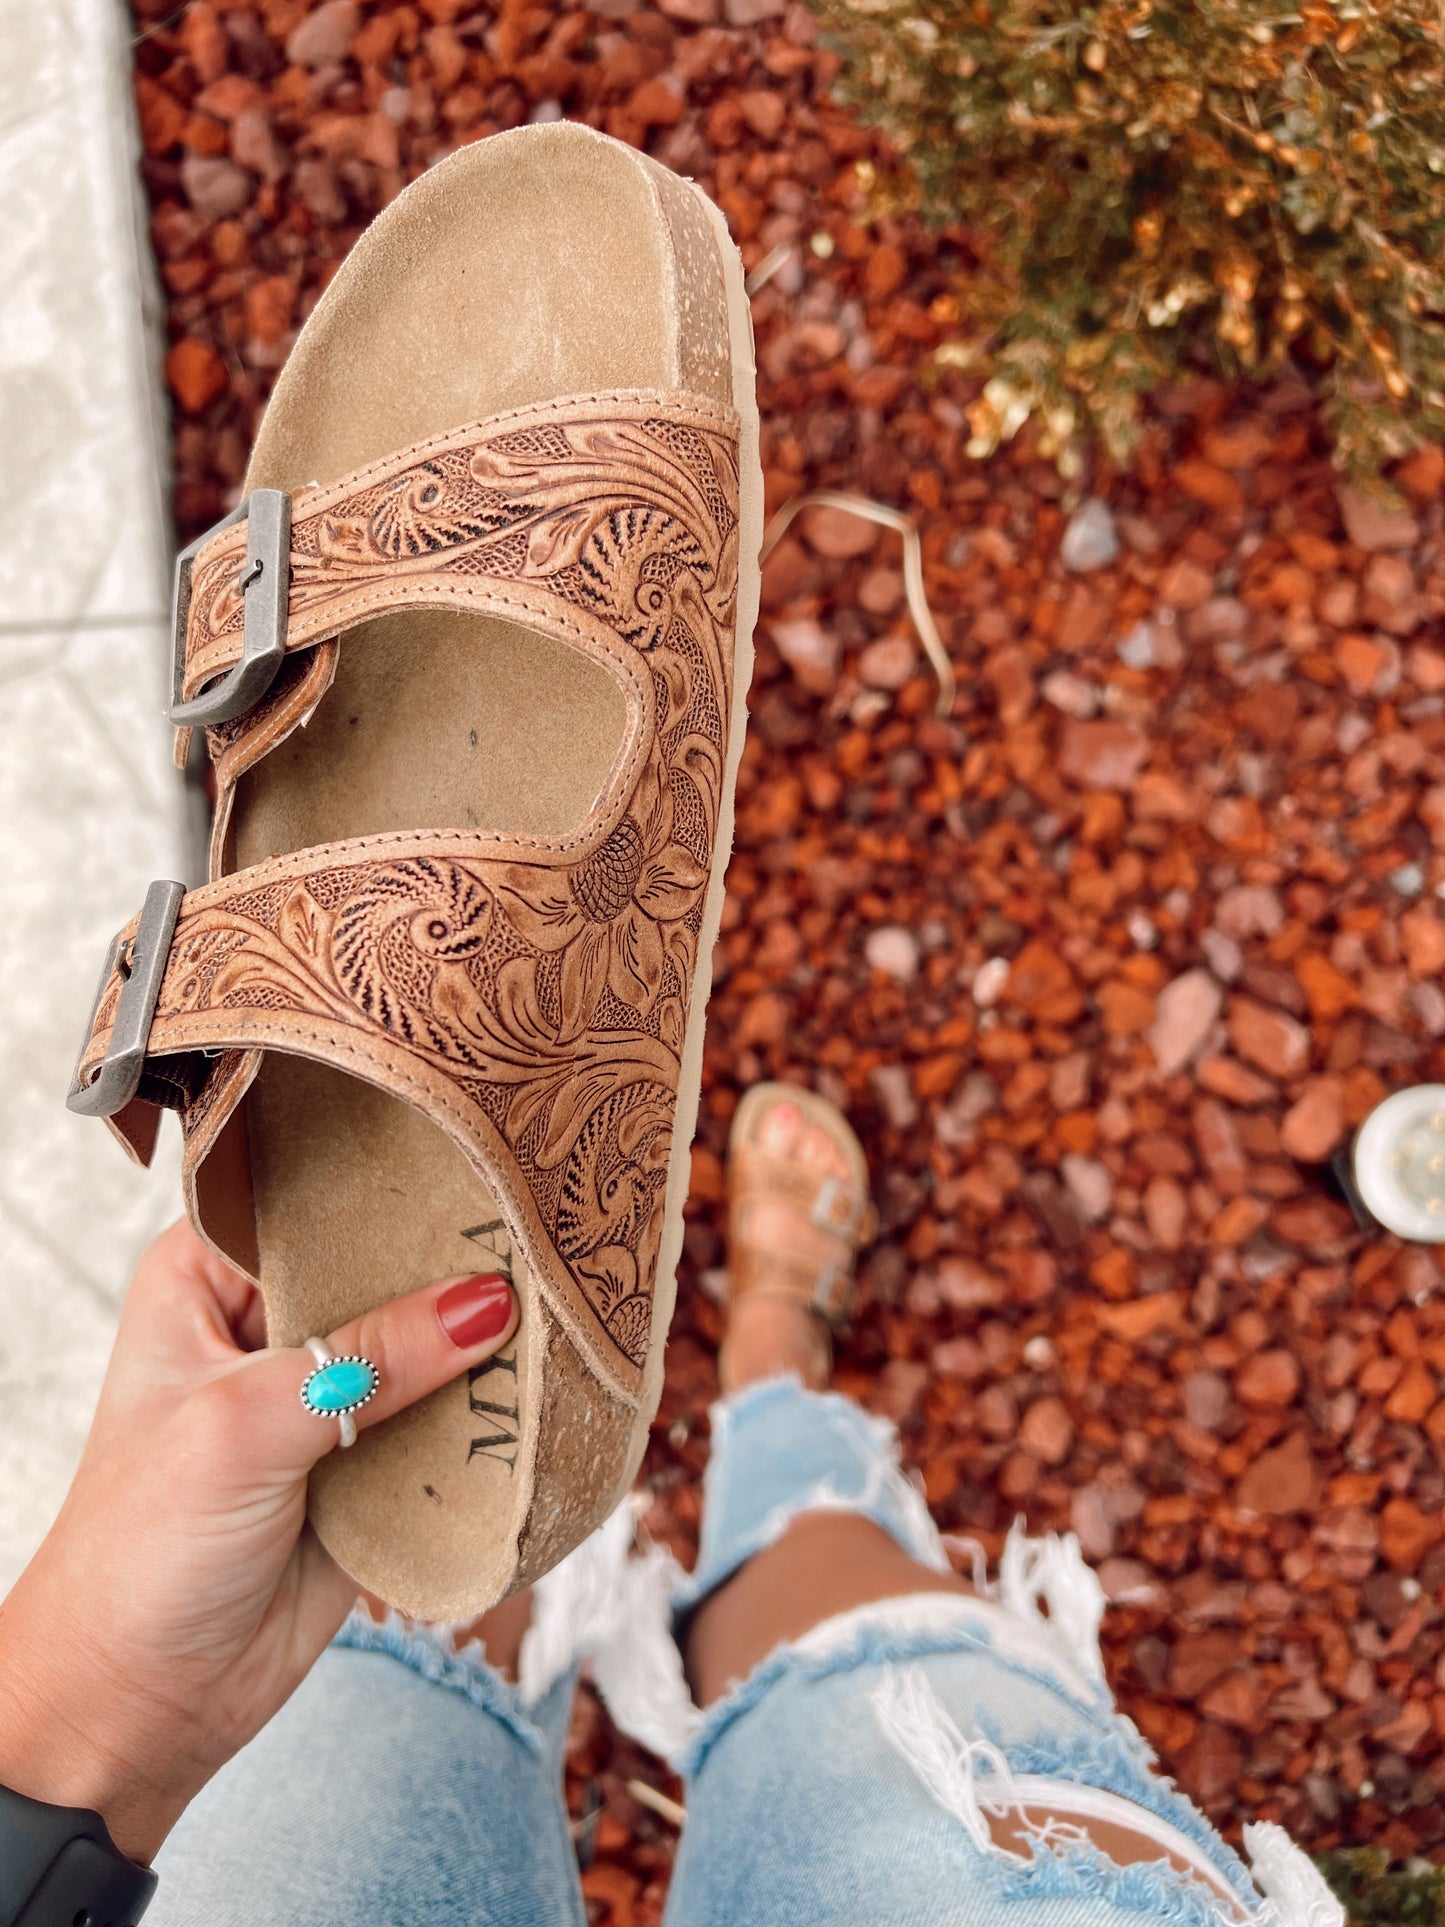 Footo Western Hand Tooled Sandals